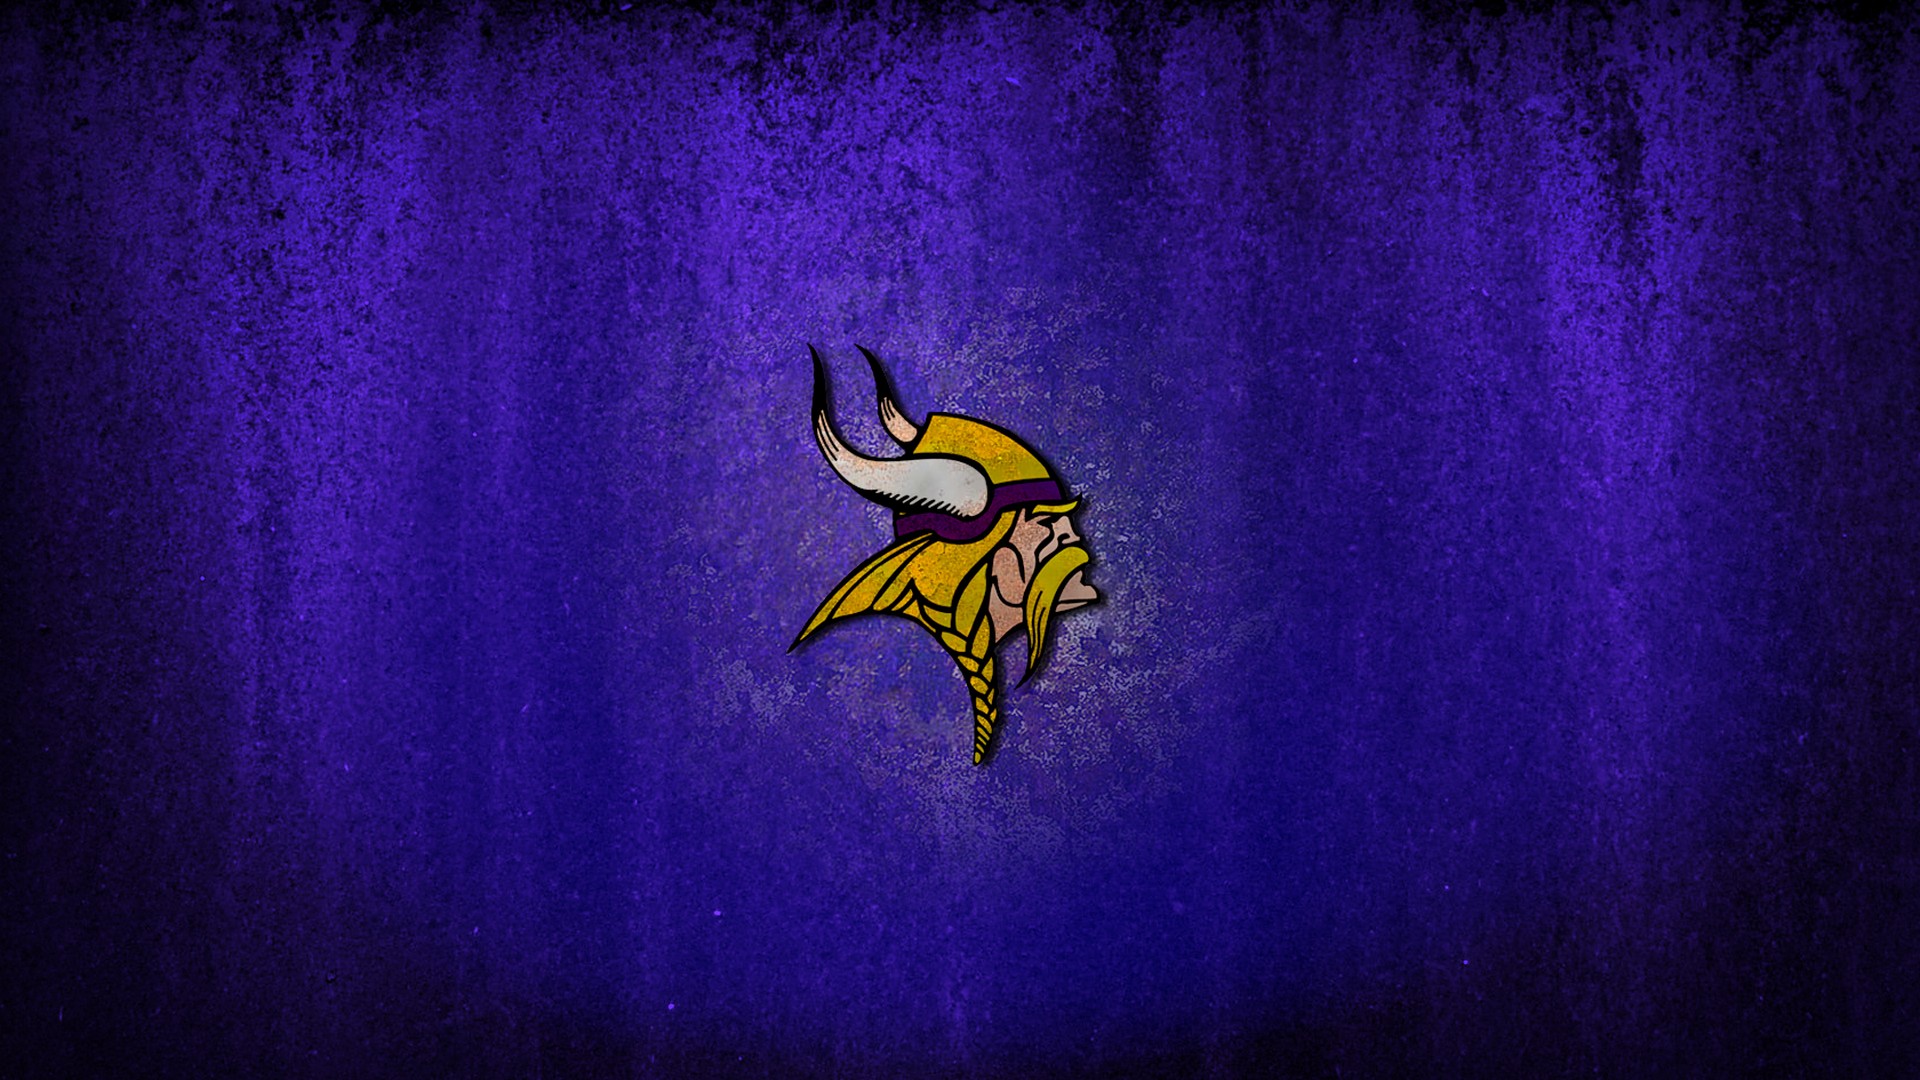 Wallpapers Minnesota Vikings With Resolution 1920X1080 pixel. You can make this wallpaper for your Mac or Windows Desktop Background, iPhone, Android or Tablet and another Smartphone device for free